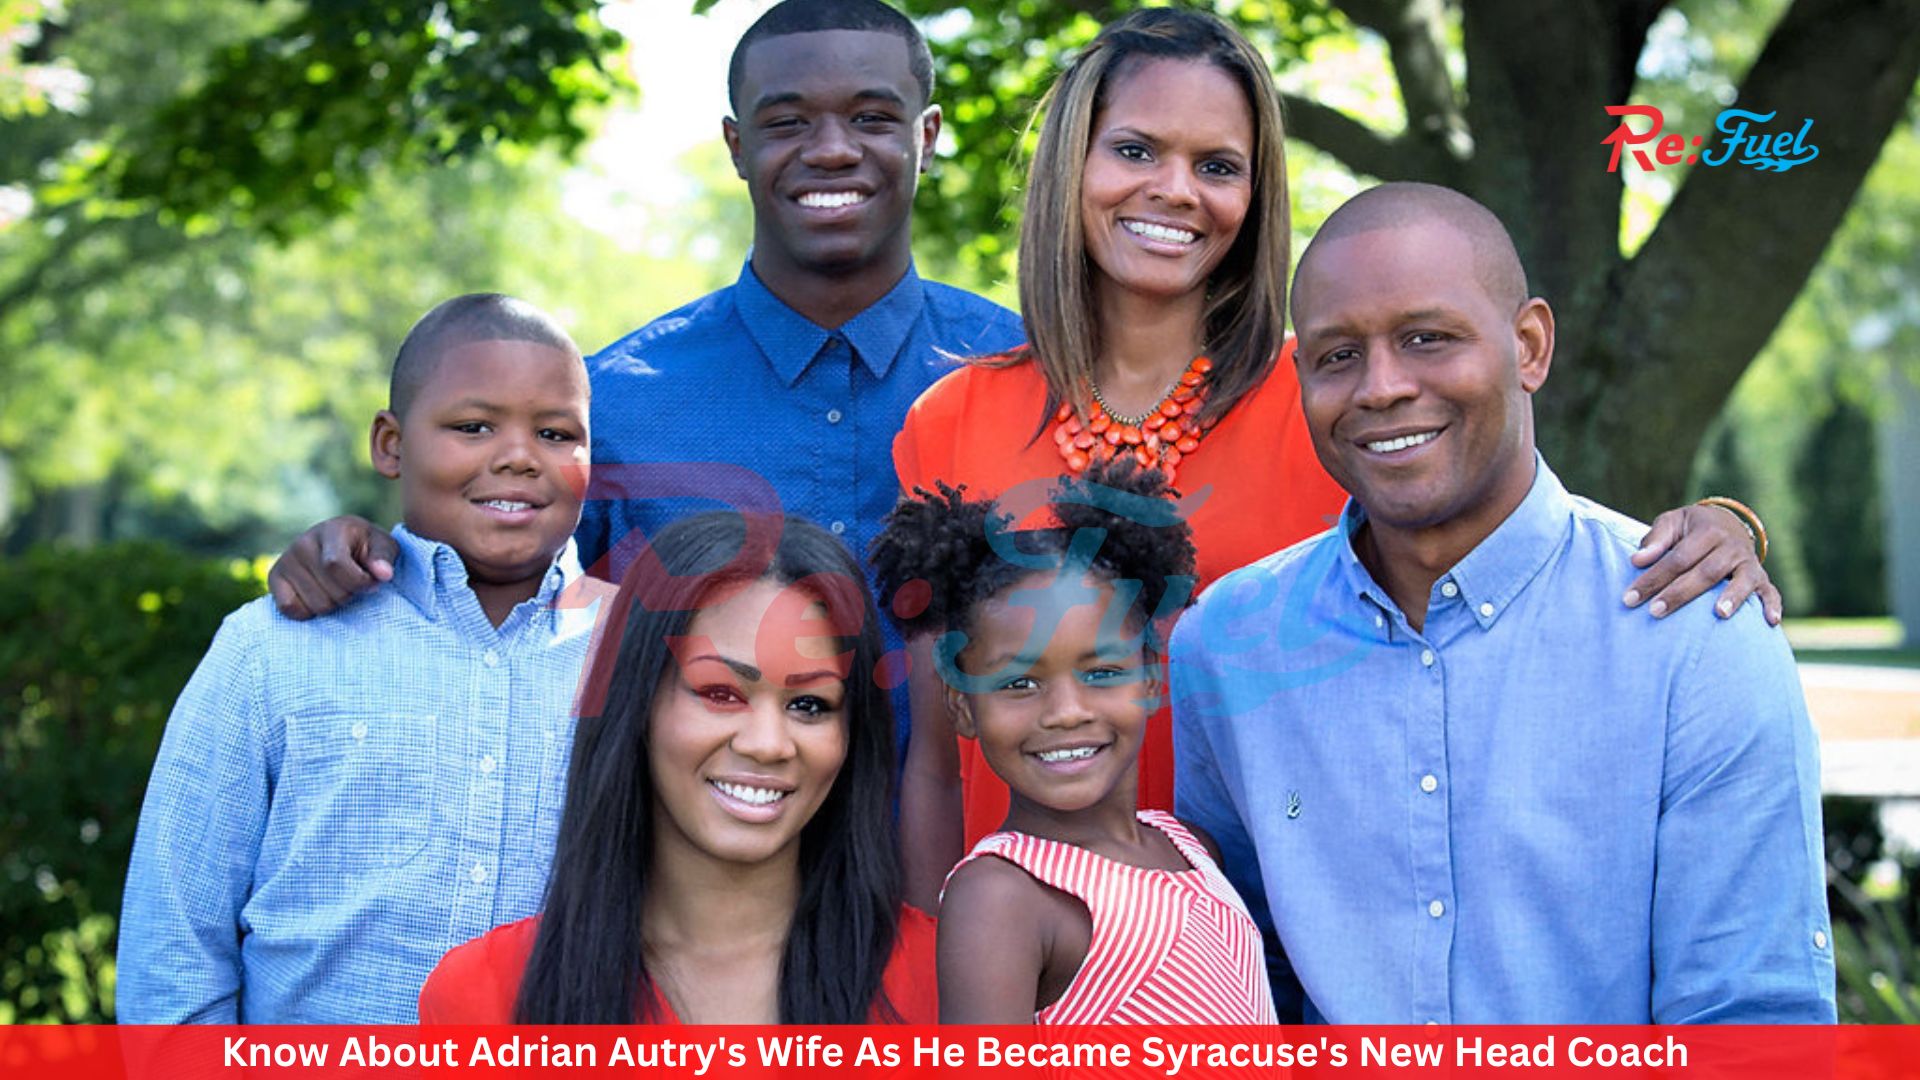 Know About Adrian Autry's Wife As He Became Syracuse's New Head Coach